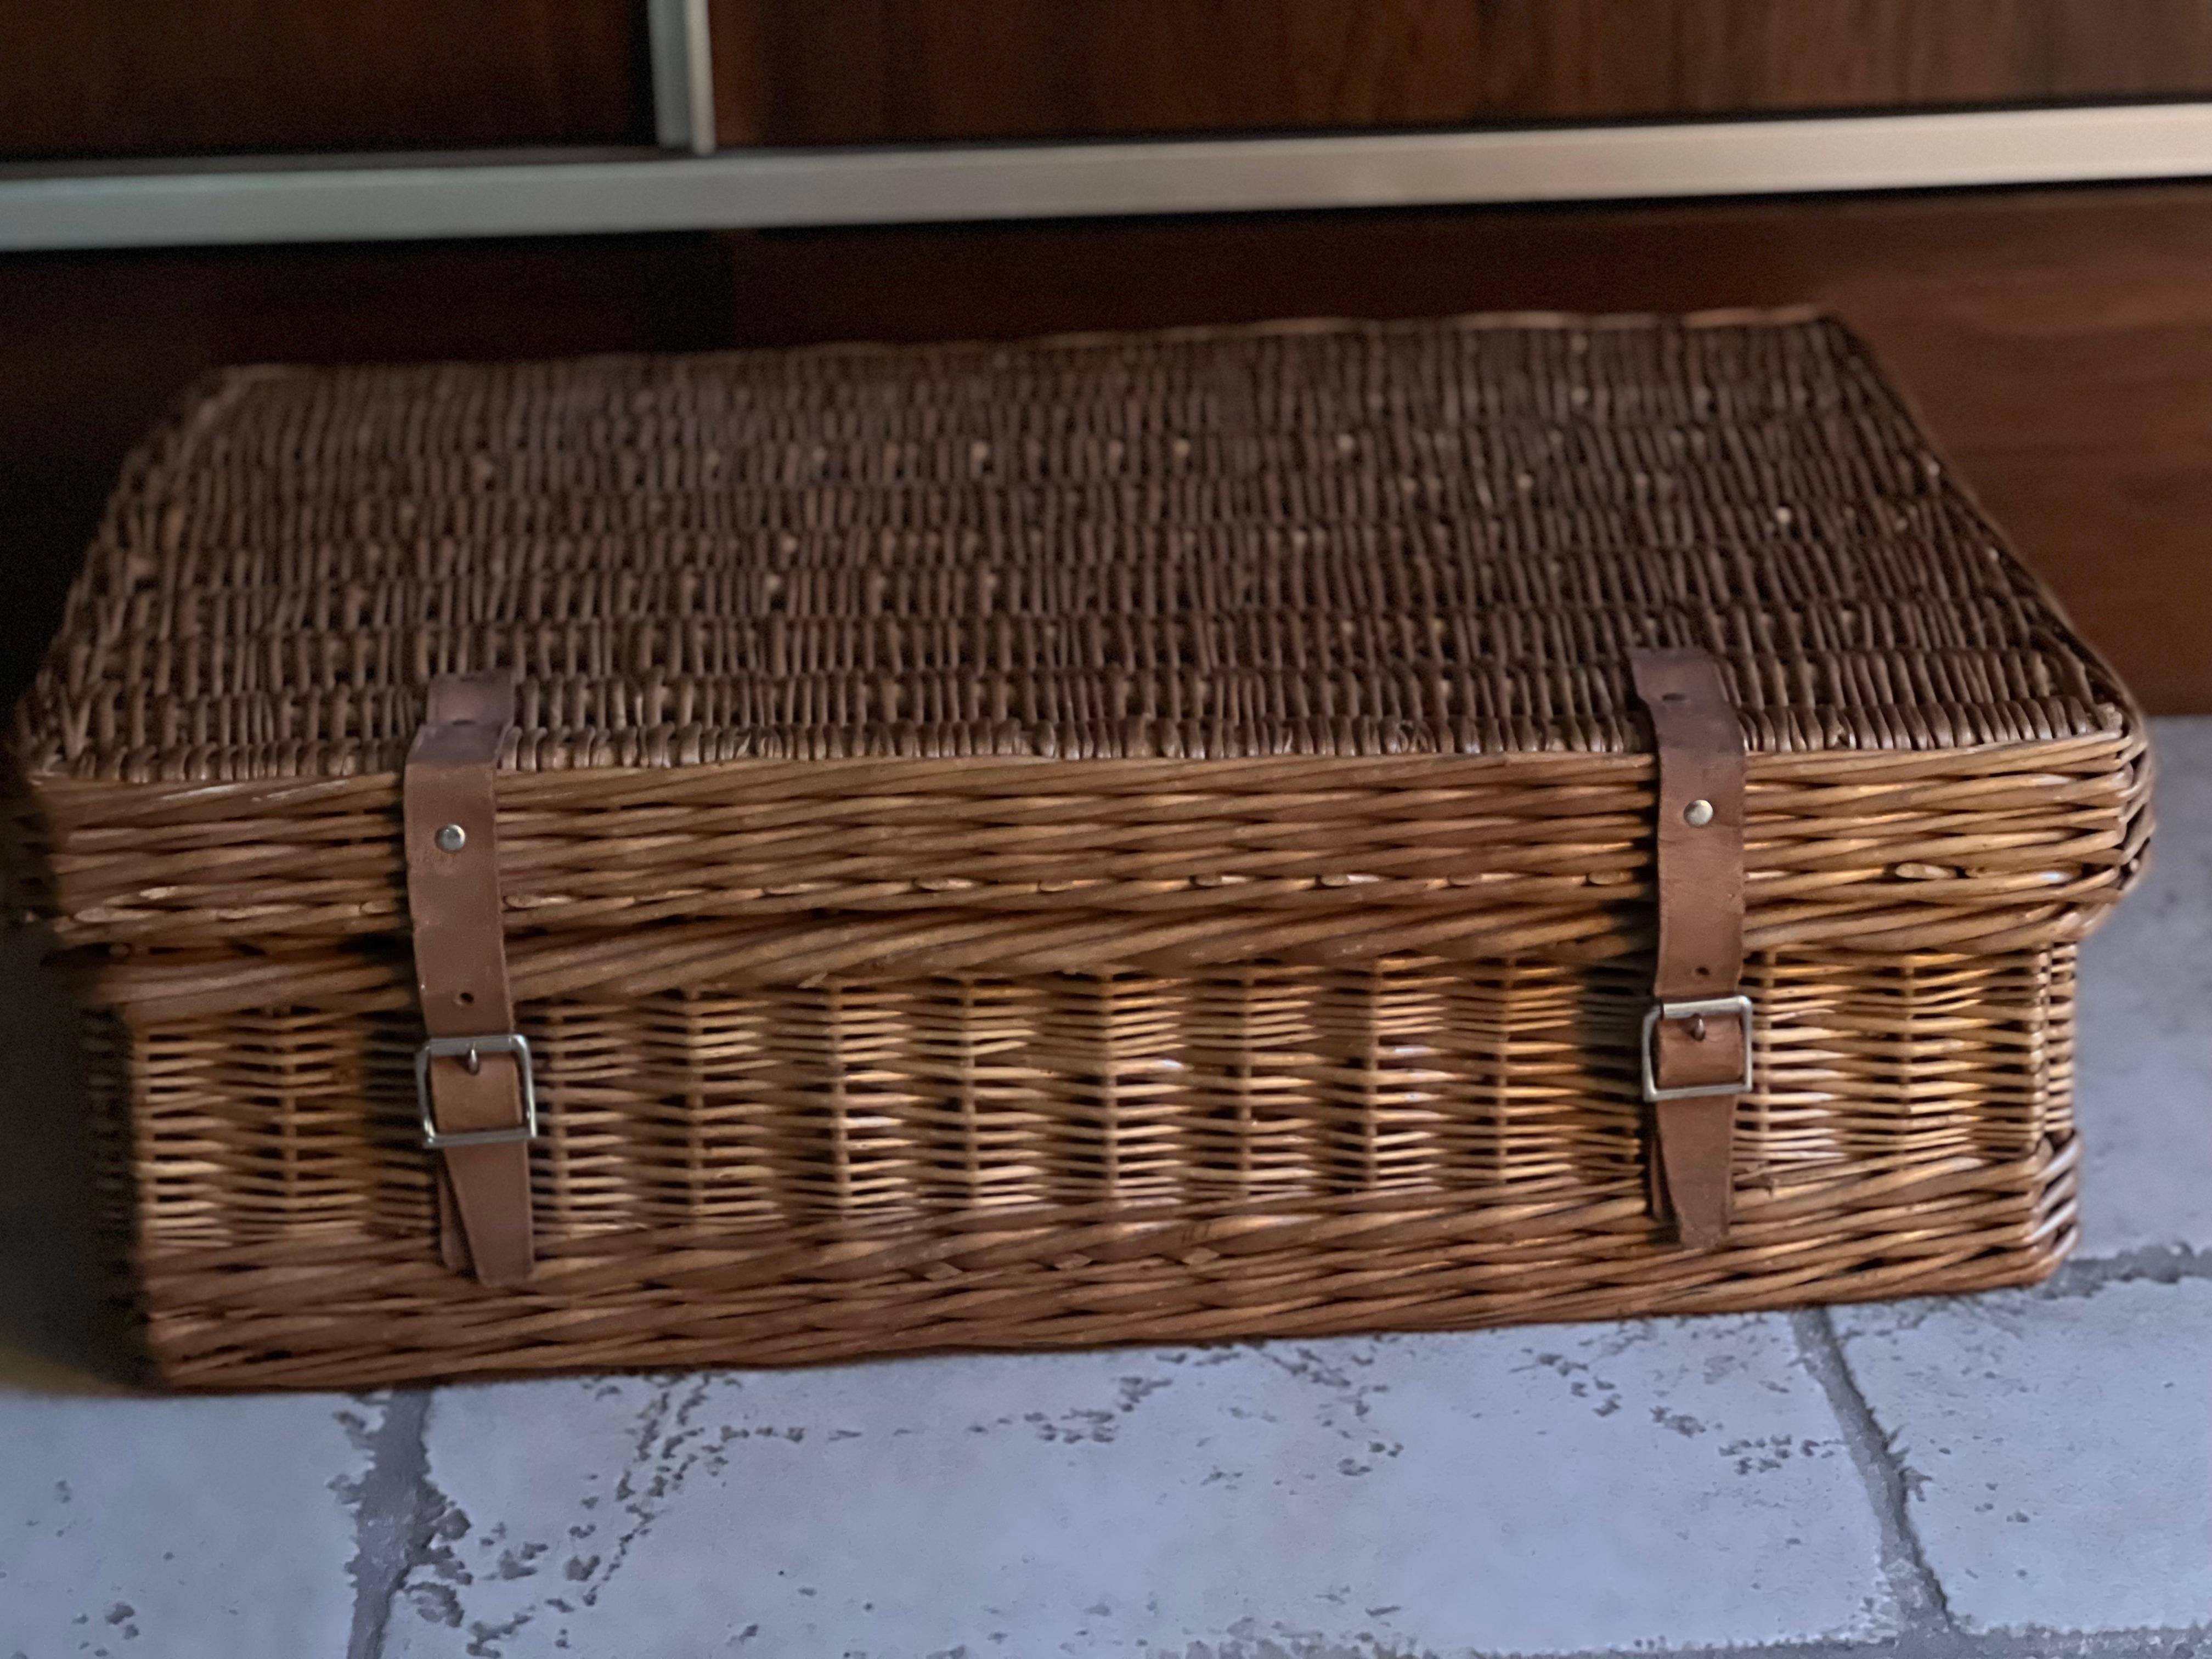 Art Deco Picnic Basket for 6 People Coracle by G. W. Scott and Son, Circa 1930